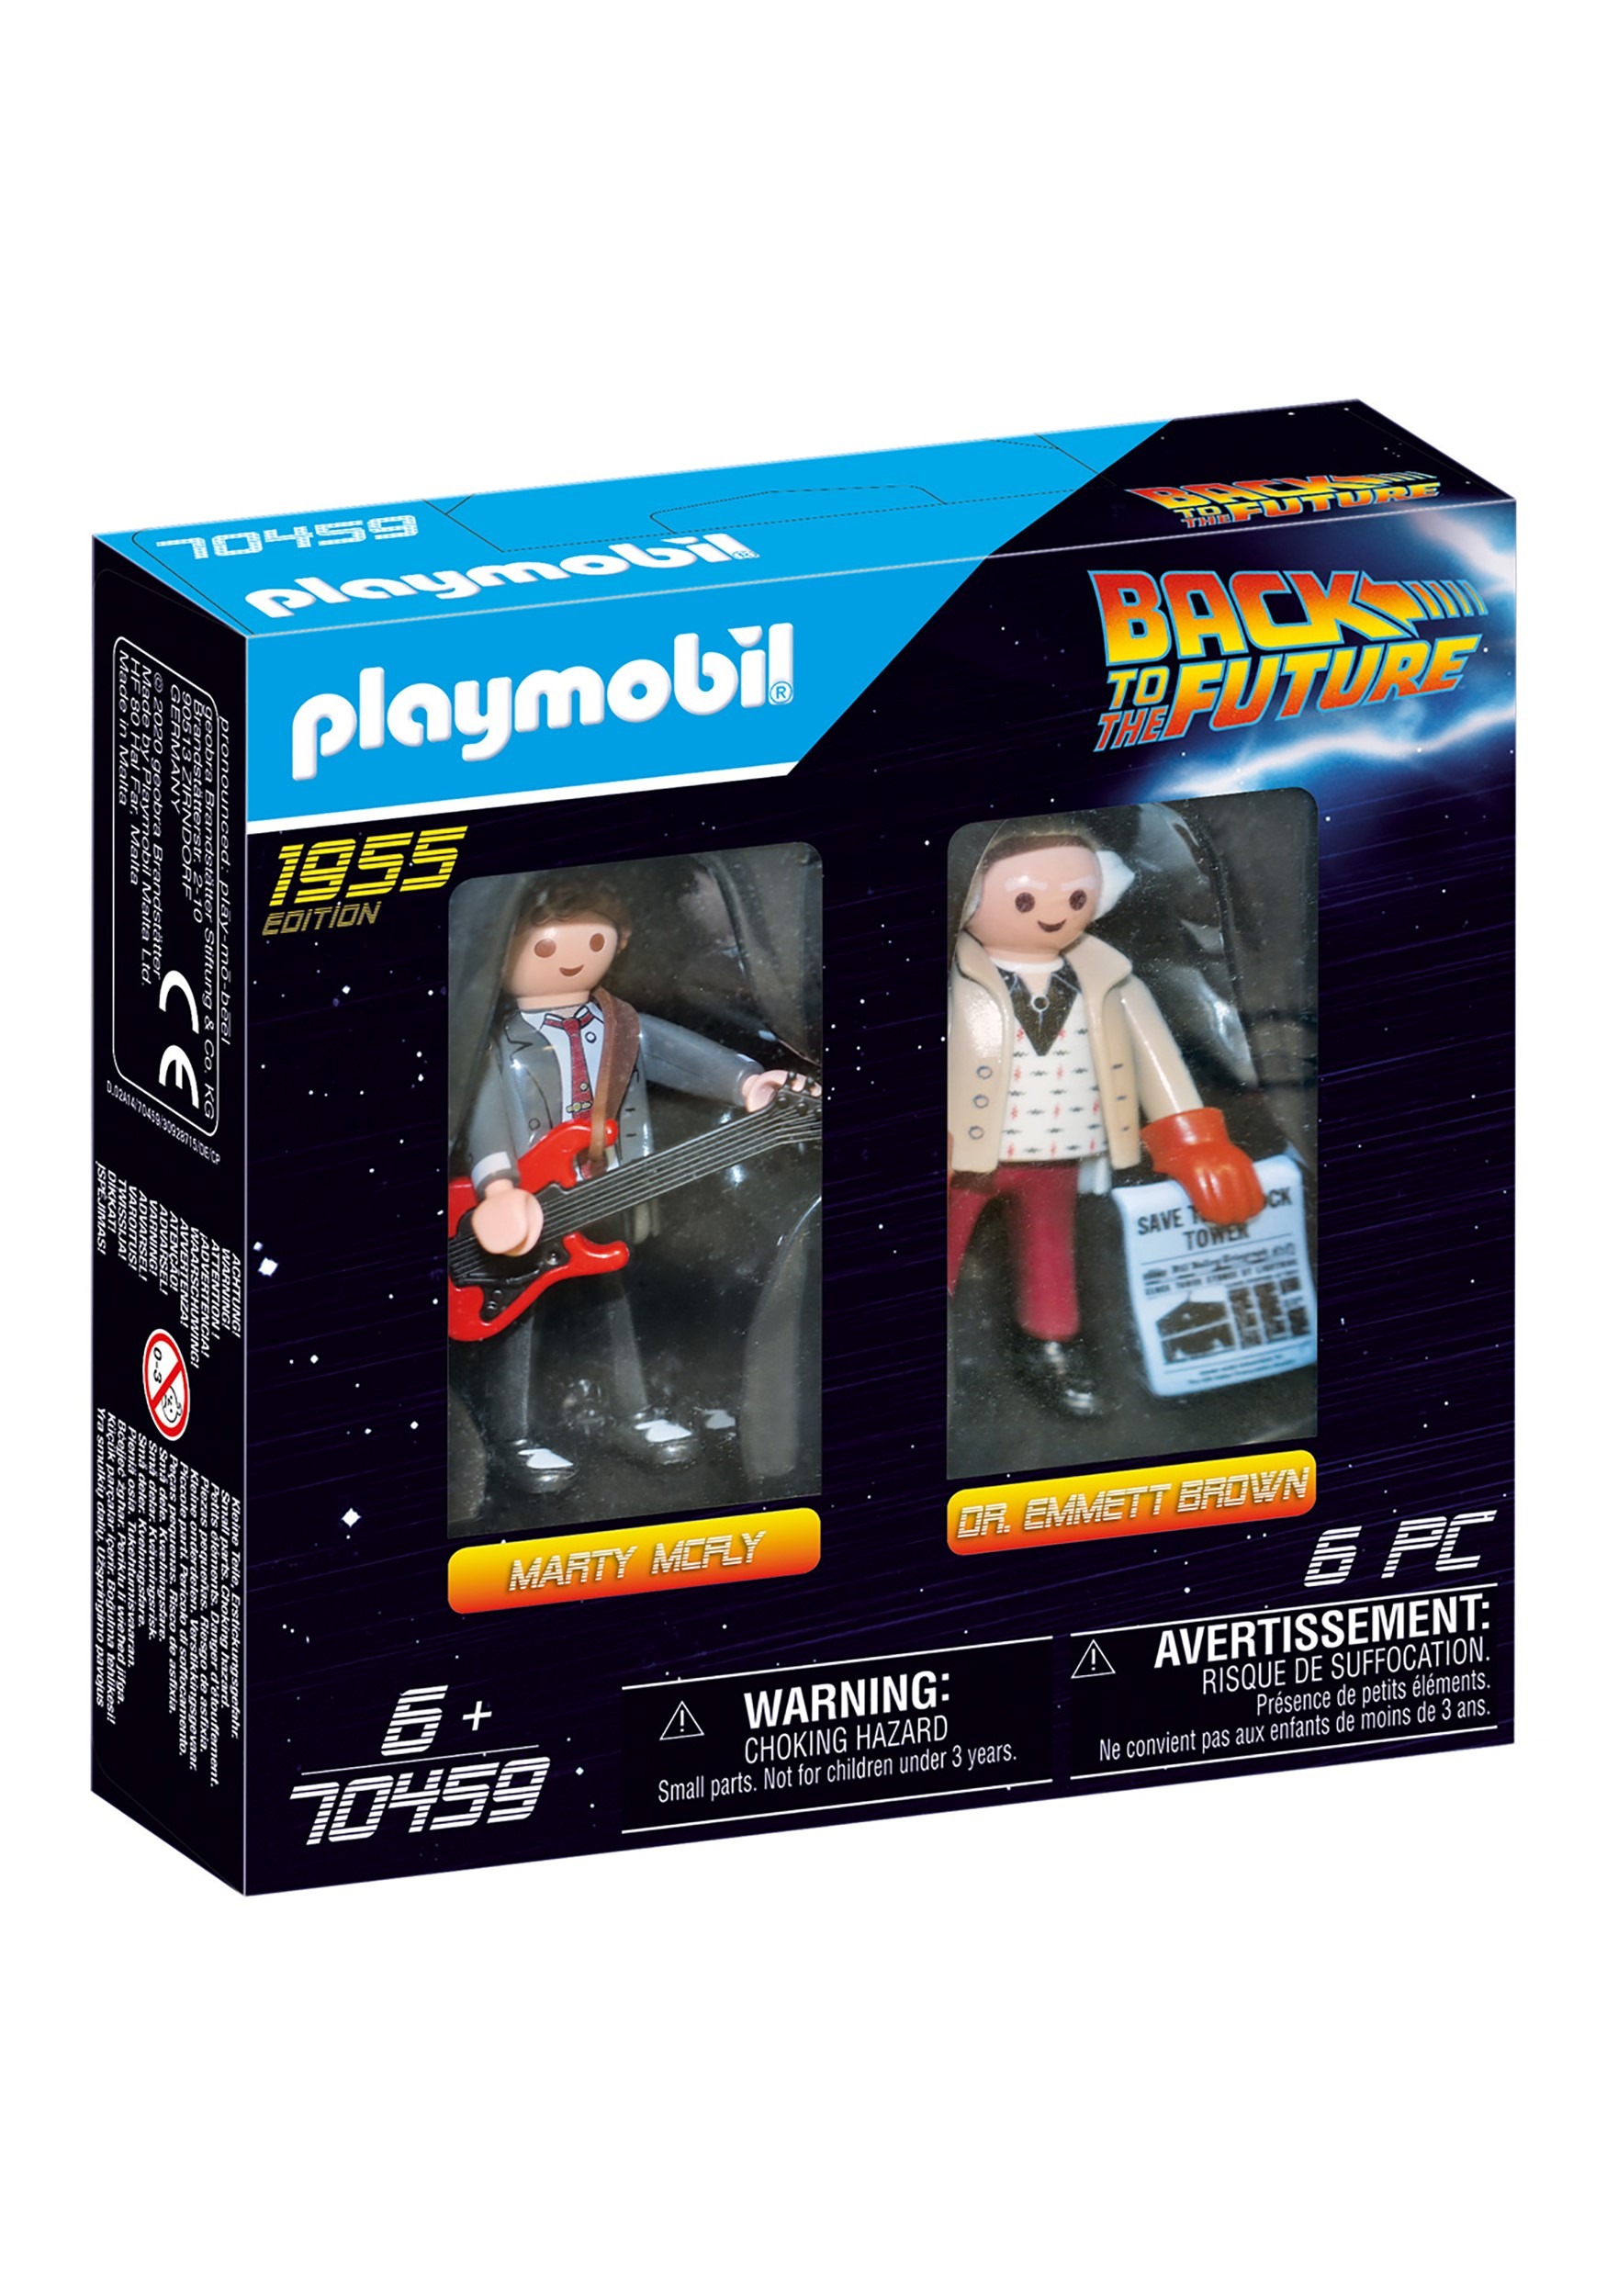 Playmobil Back to the Future Marty McFly and Dr. Emmett Brown